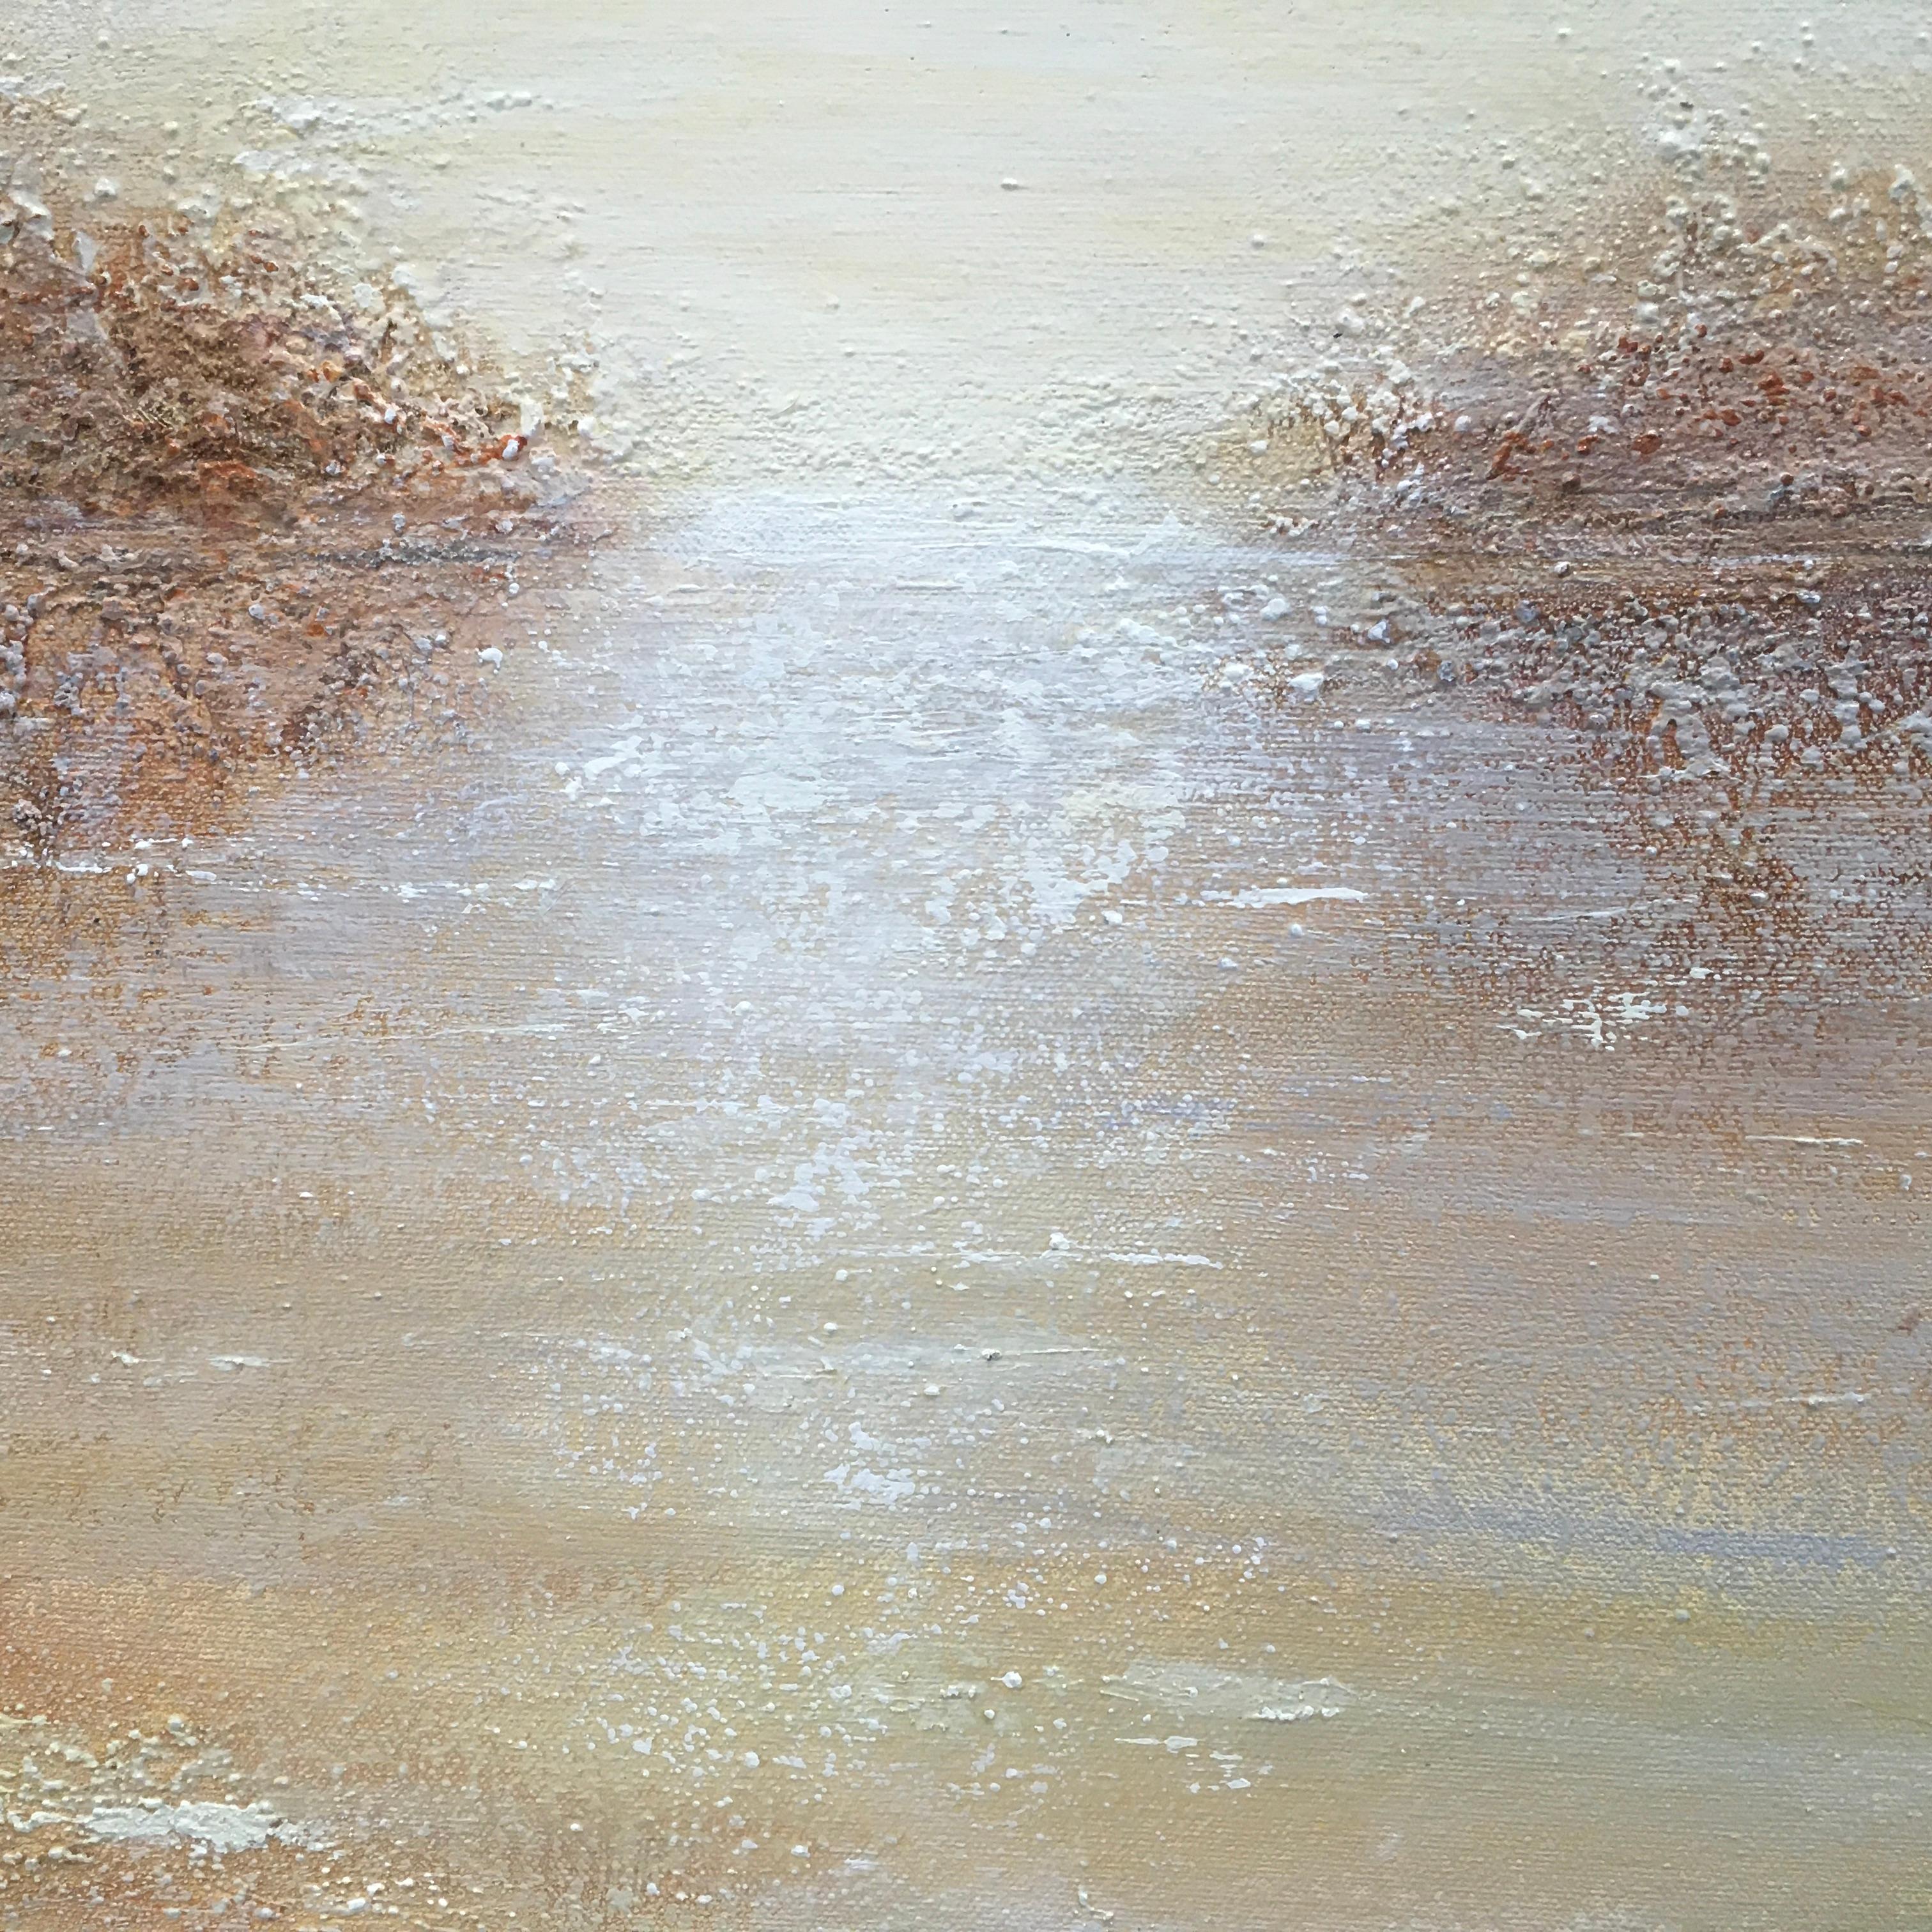 Golden - Contemporary Landscape Painting by Clodagh Meiklejohn 2